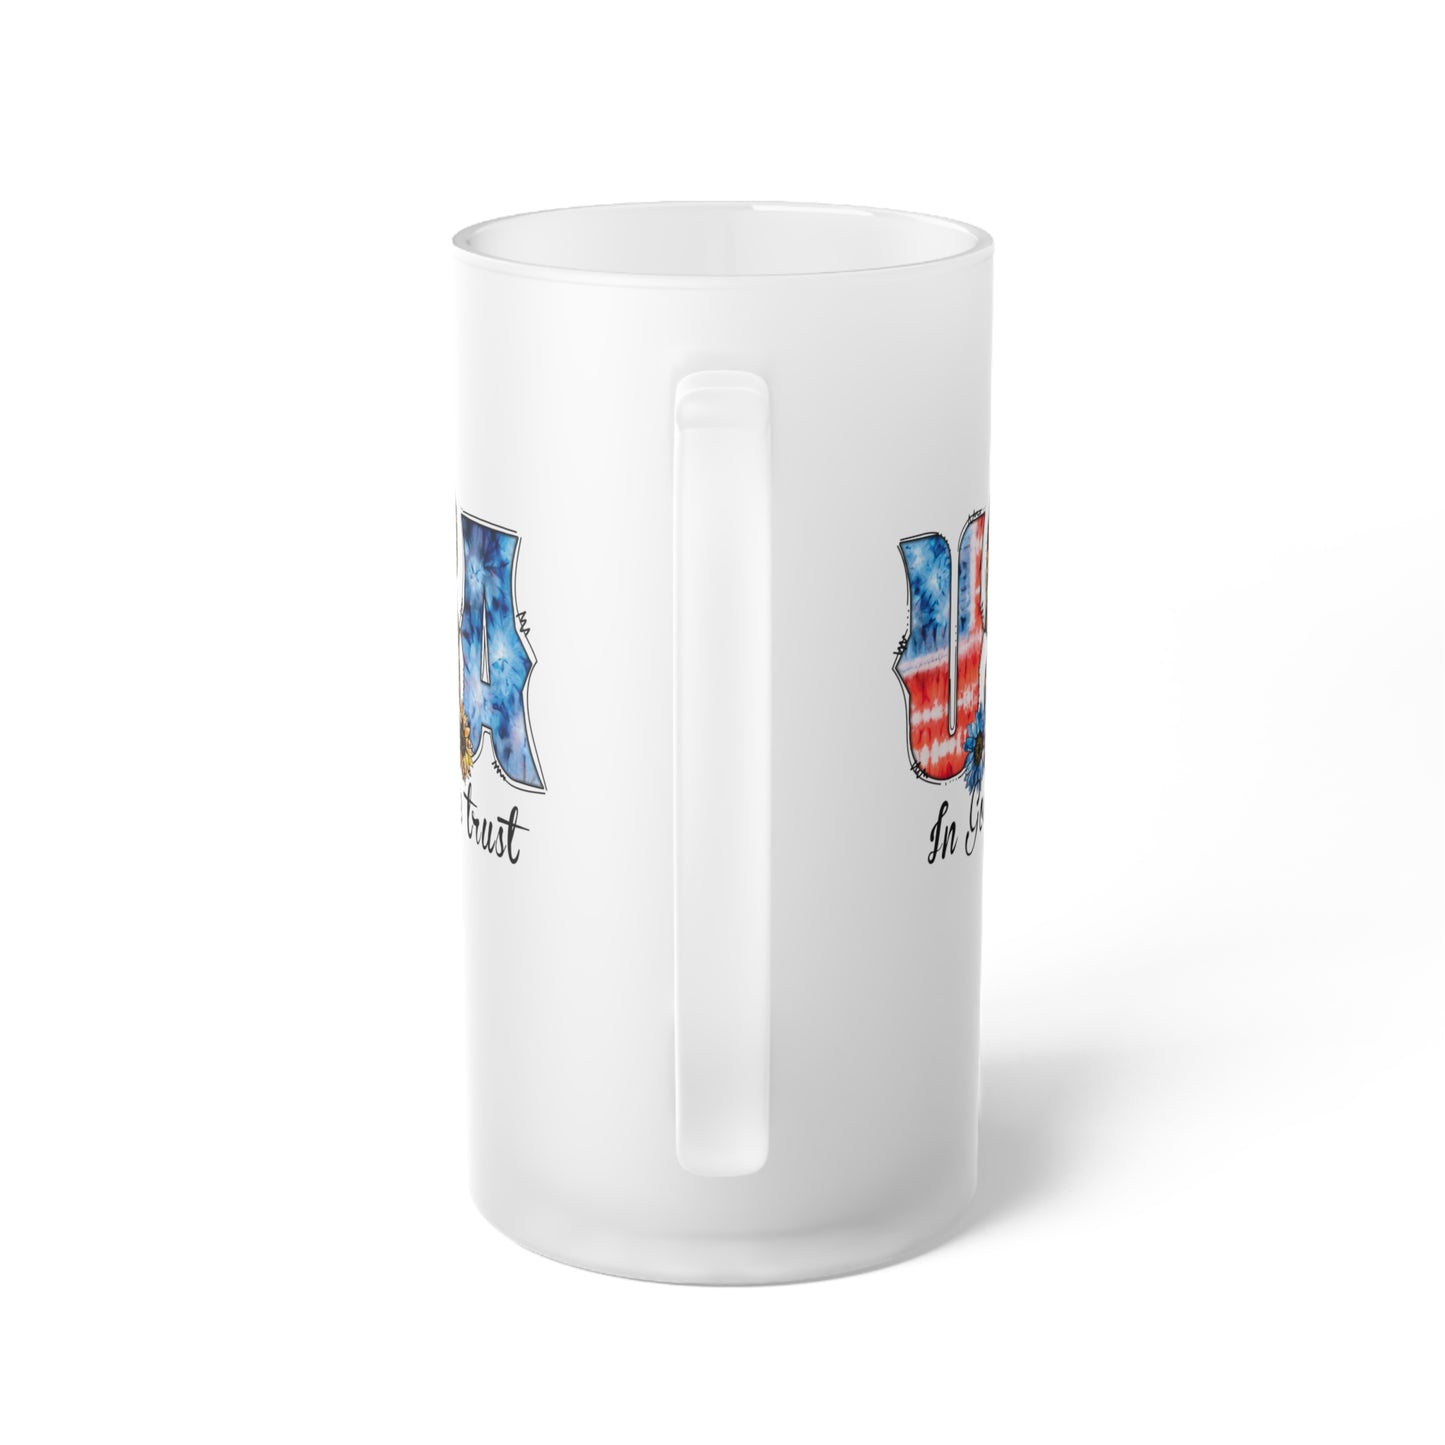 USA In God We Trust Frosted Glass Beer Mug